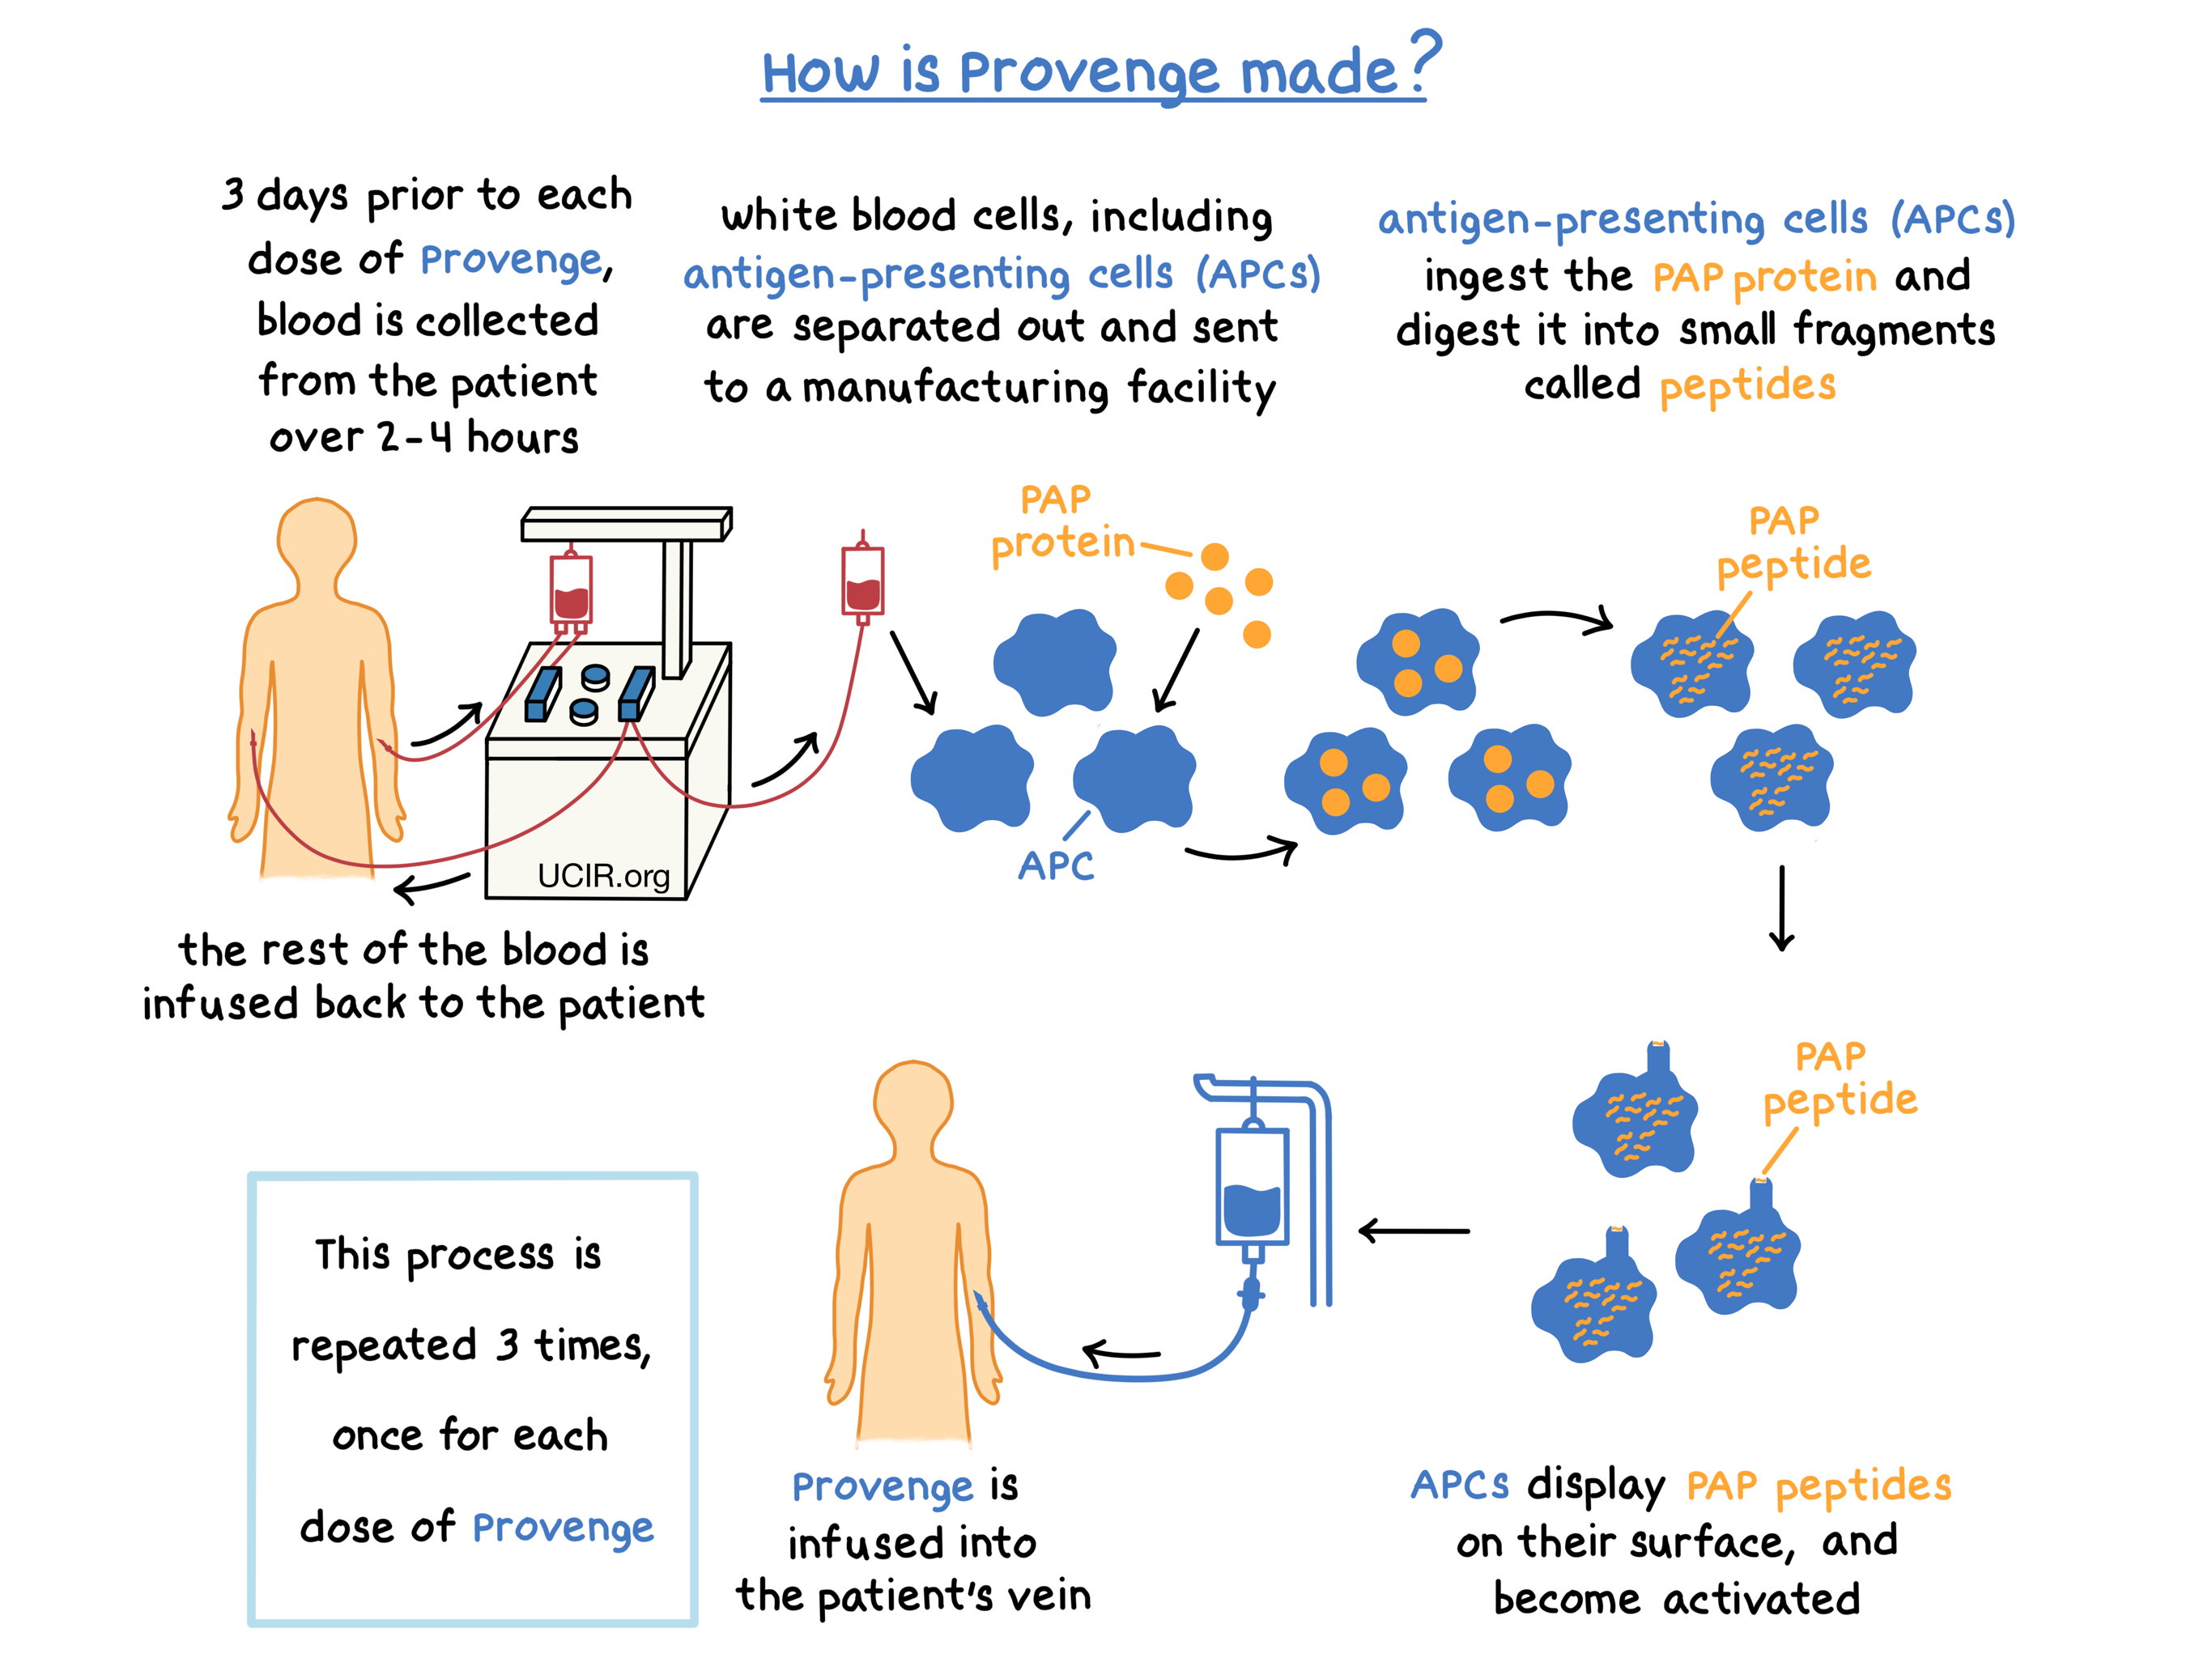 Illustration showing how Provenge is made